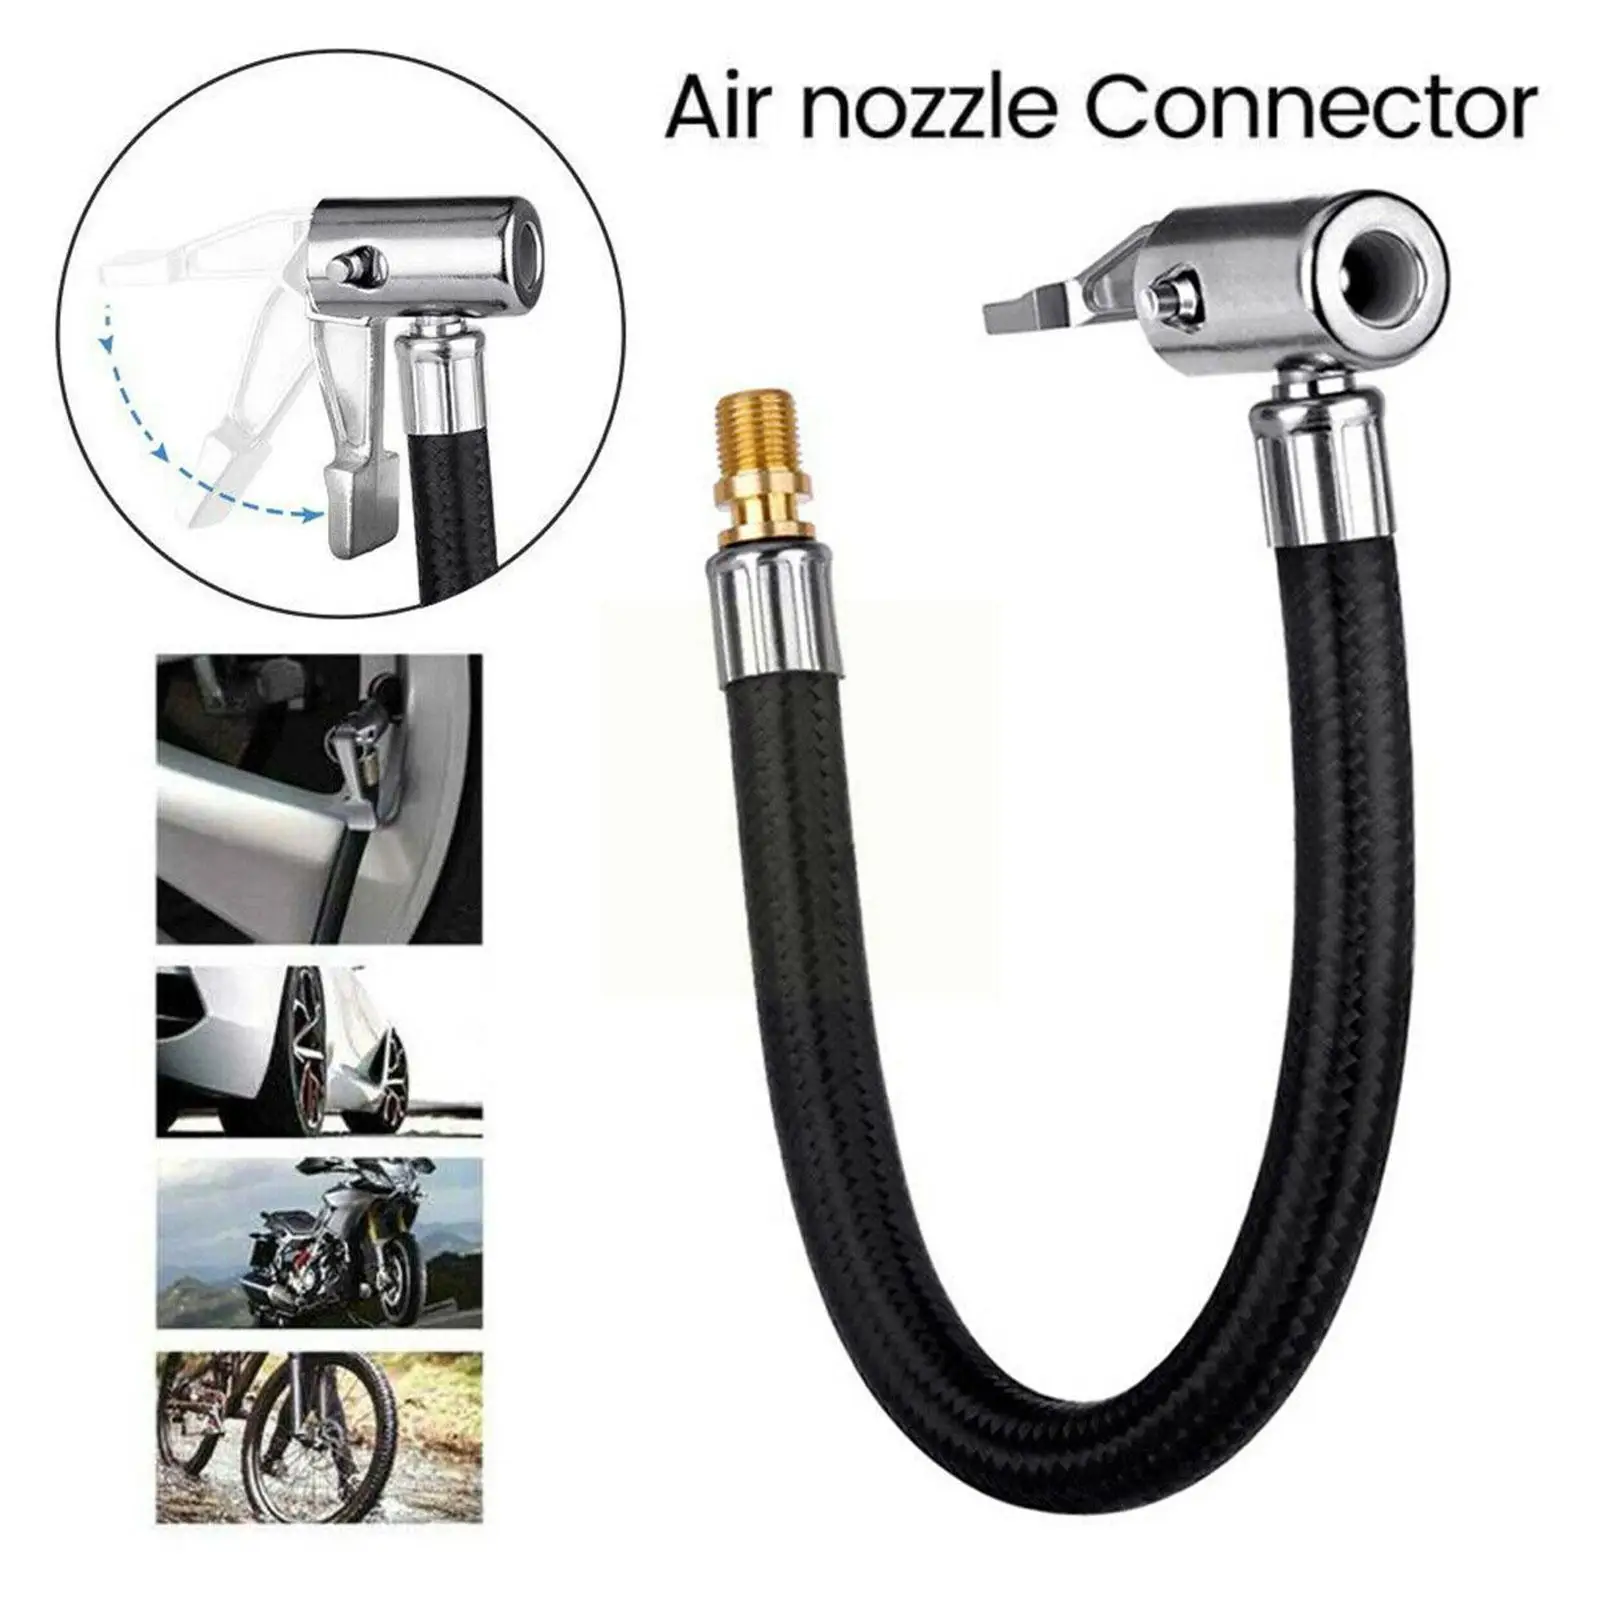 

Car Tire Inflator Hose Inflatable Air Pump Extension Tube Adapter Twist Tyre Connection Locking Air Chuck For Bike Motorcyc C5f7